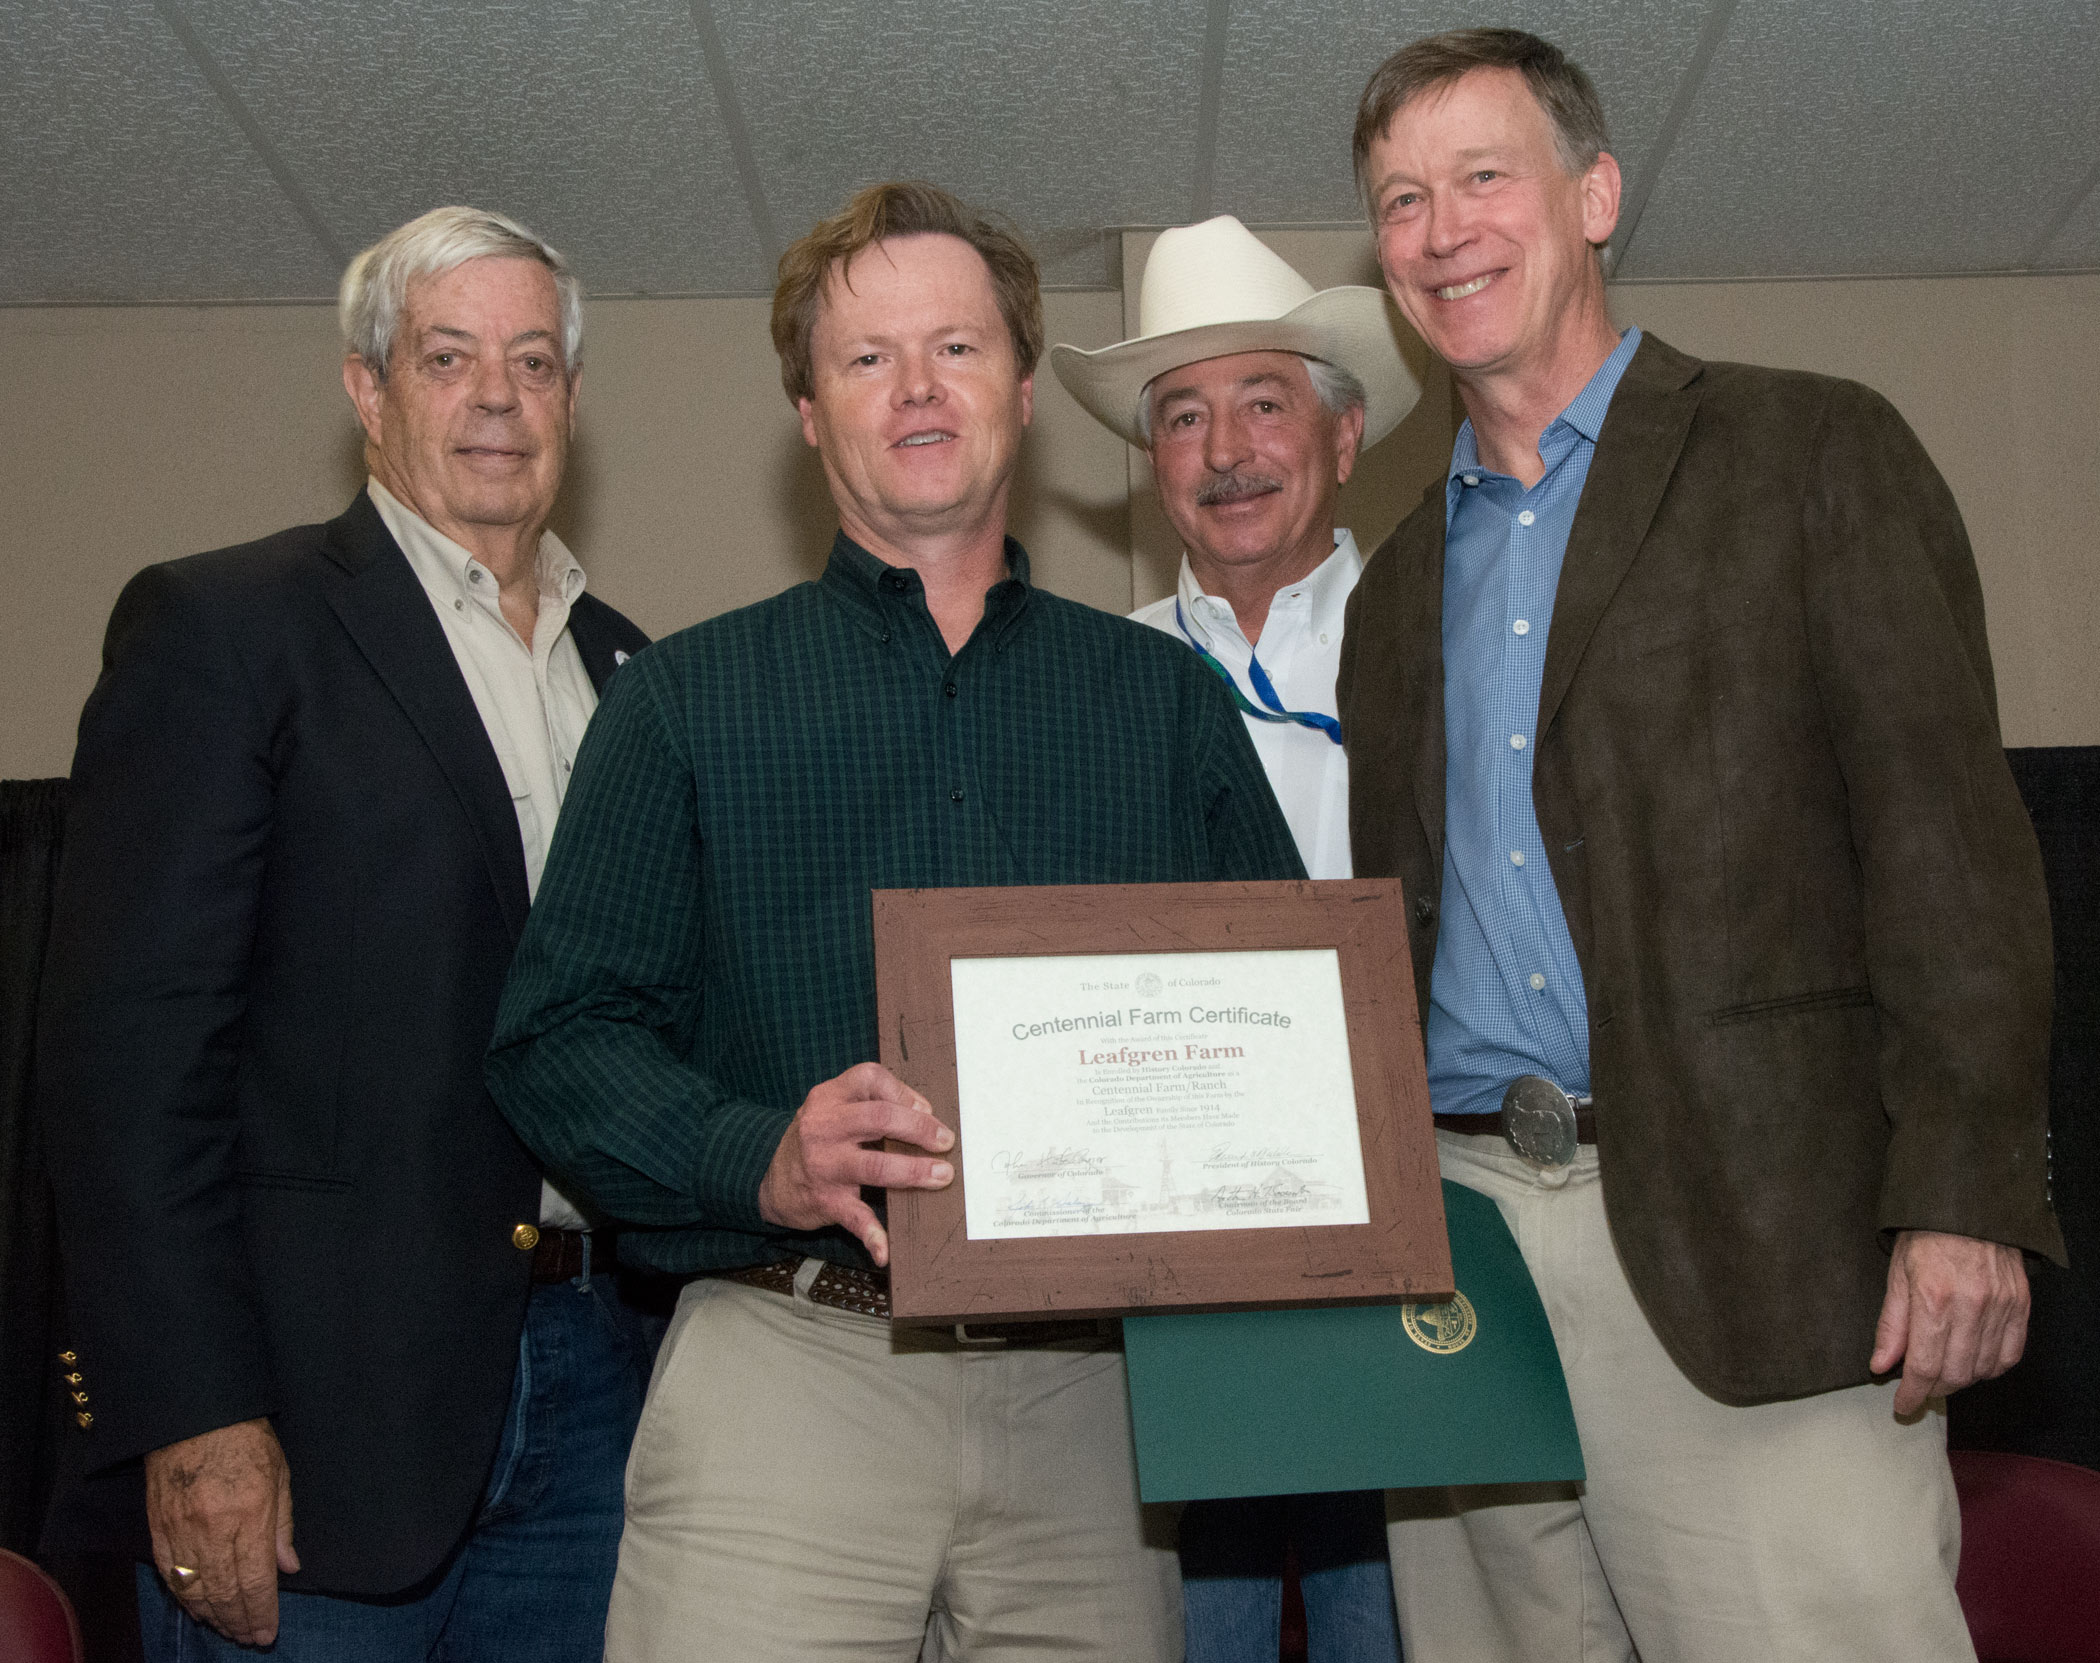 One of the Leafgrens receiving the Centennial Farm award on stage from Ed Nichols, John Salazar and John Hickenlooper.